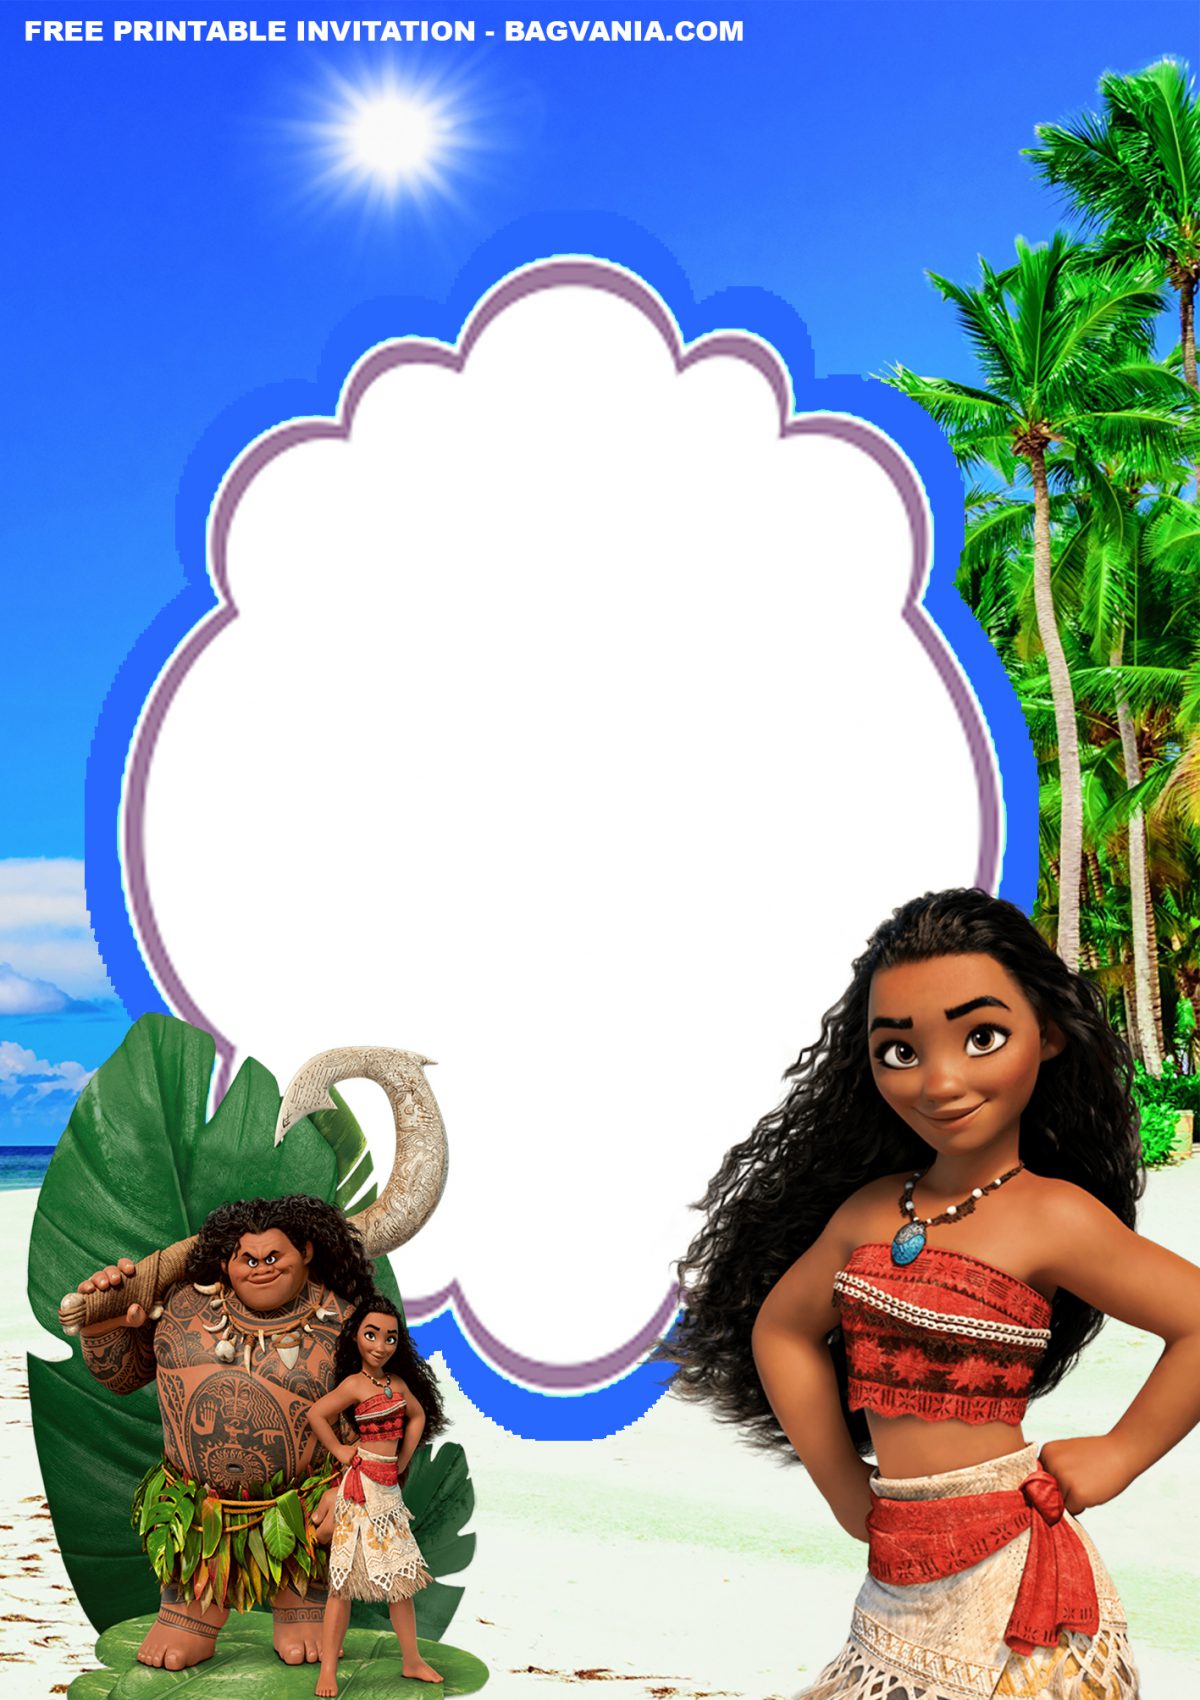 Free Printable Baby Moana Birthday Invitation Templates With Portrait Design and Blue Text Frame